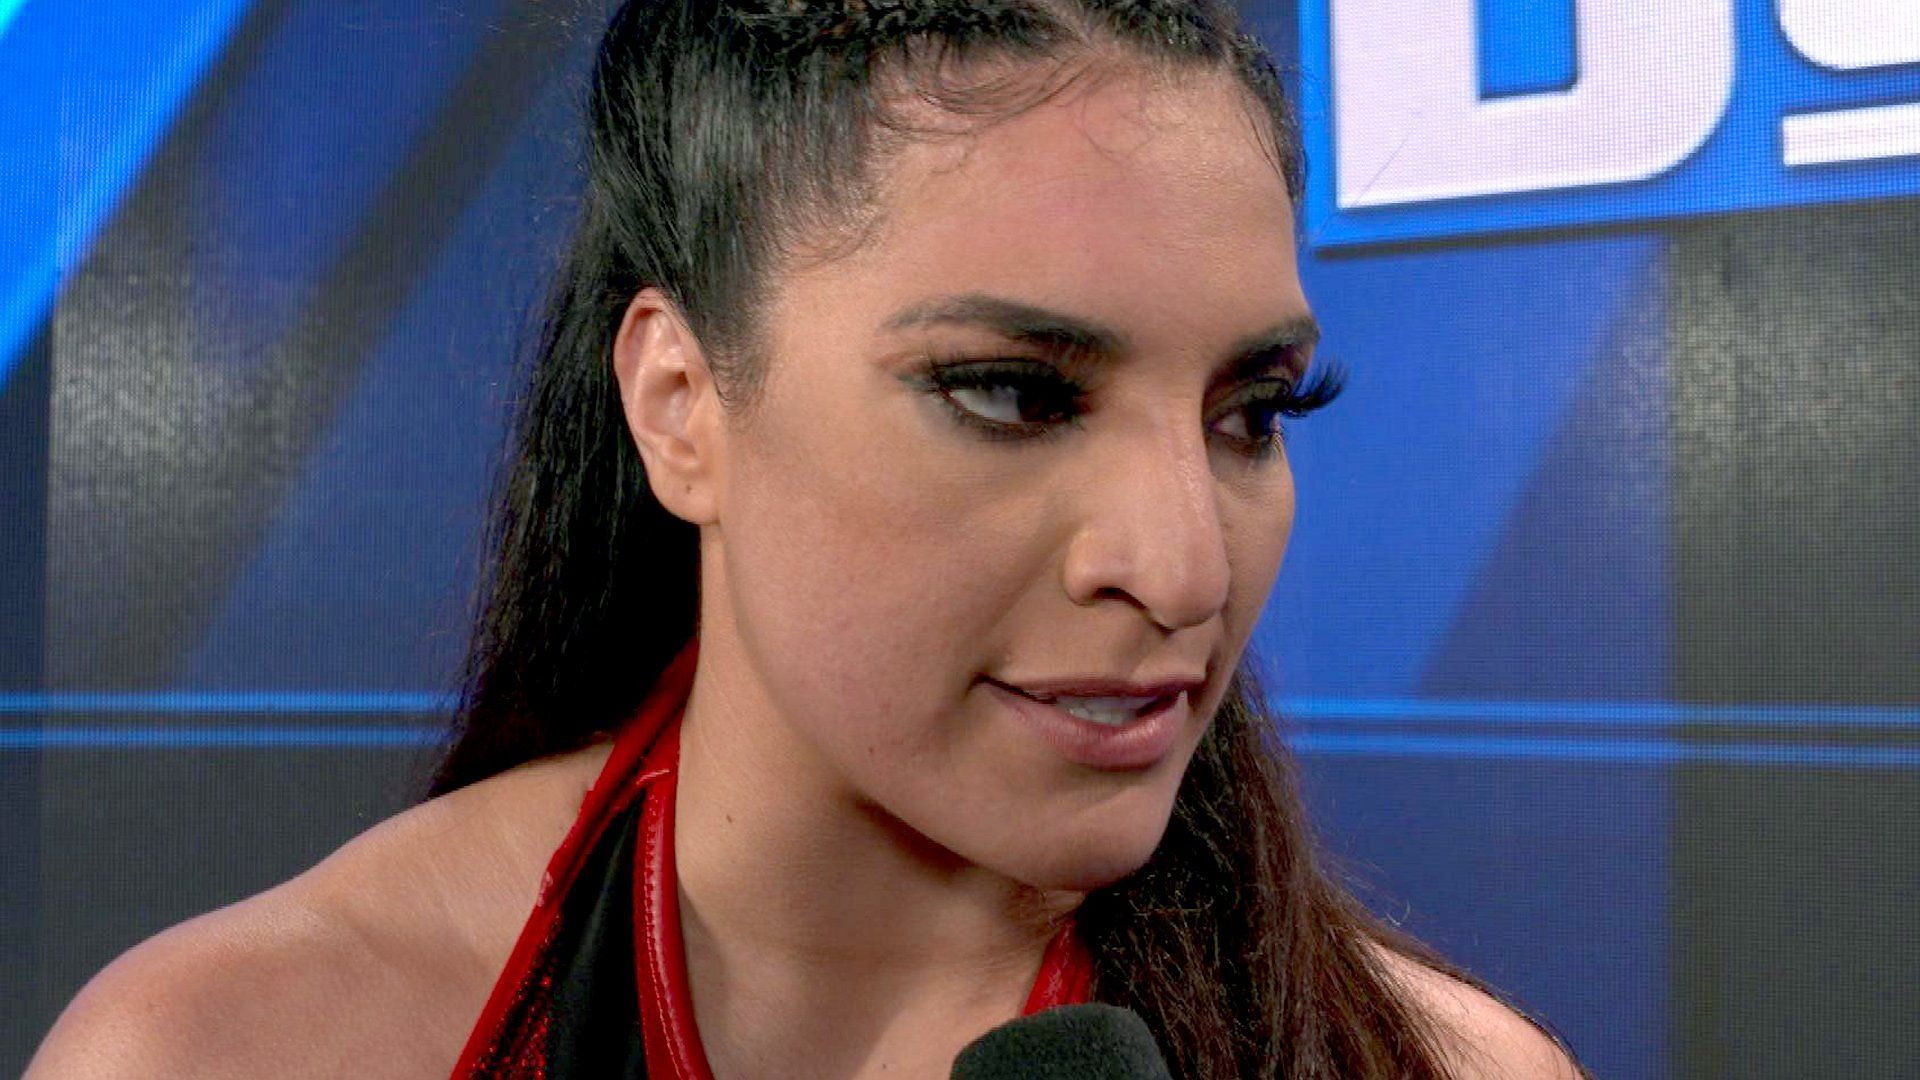 Raquel Rodriguez is now on the RAW